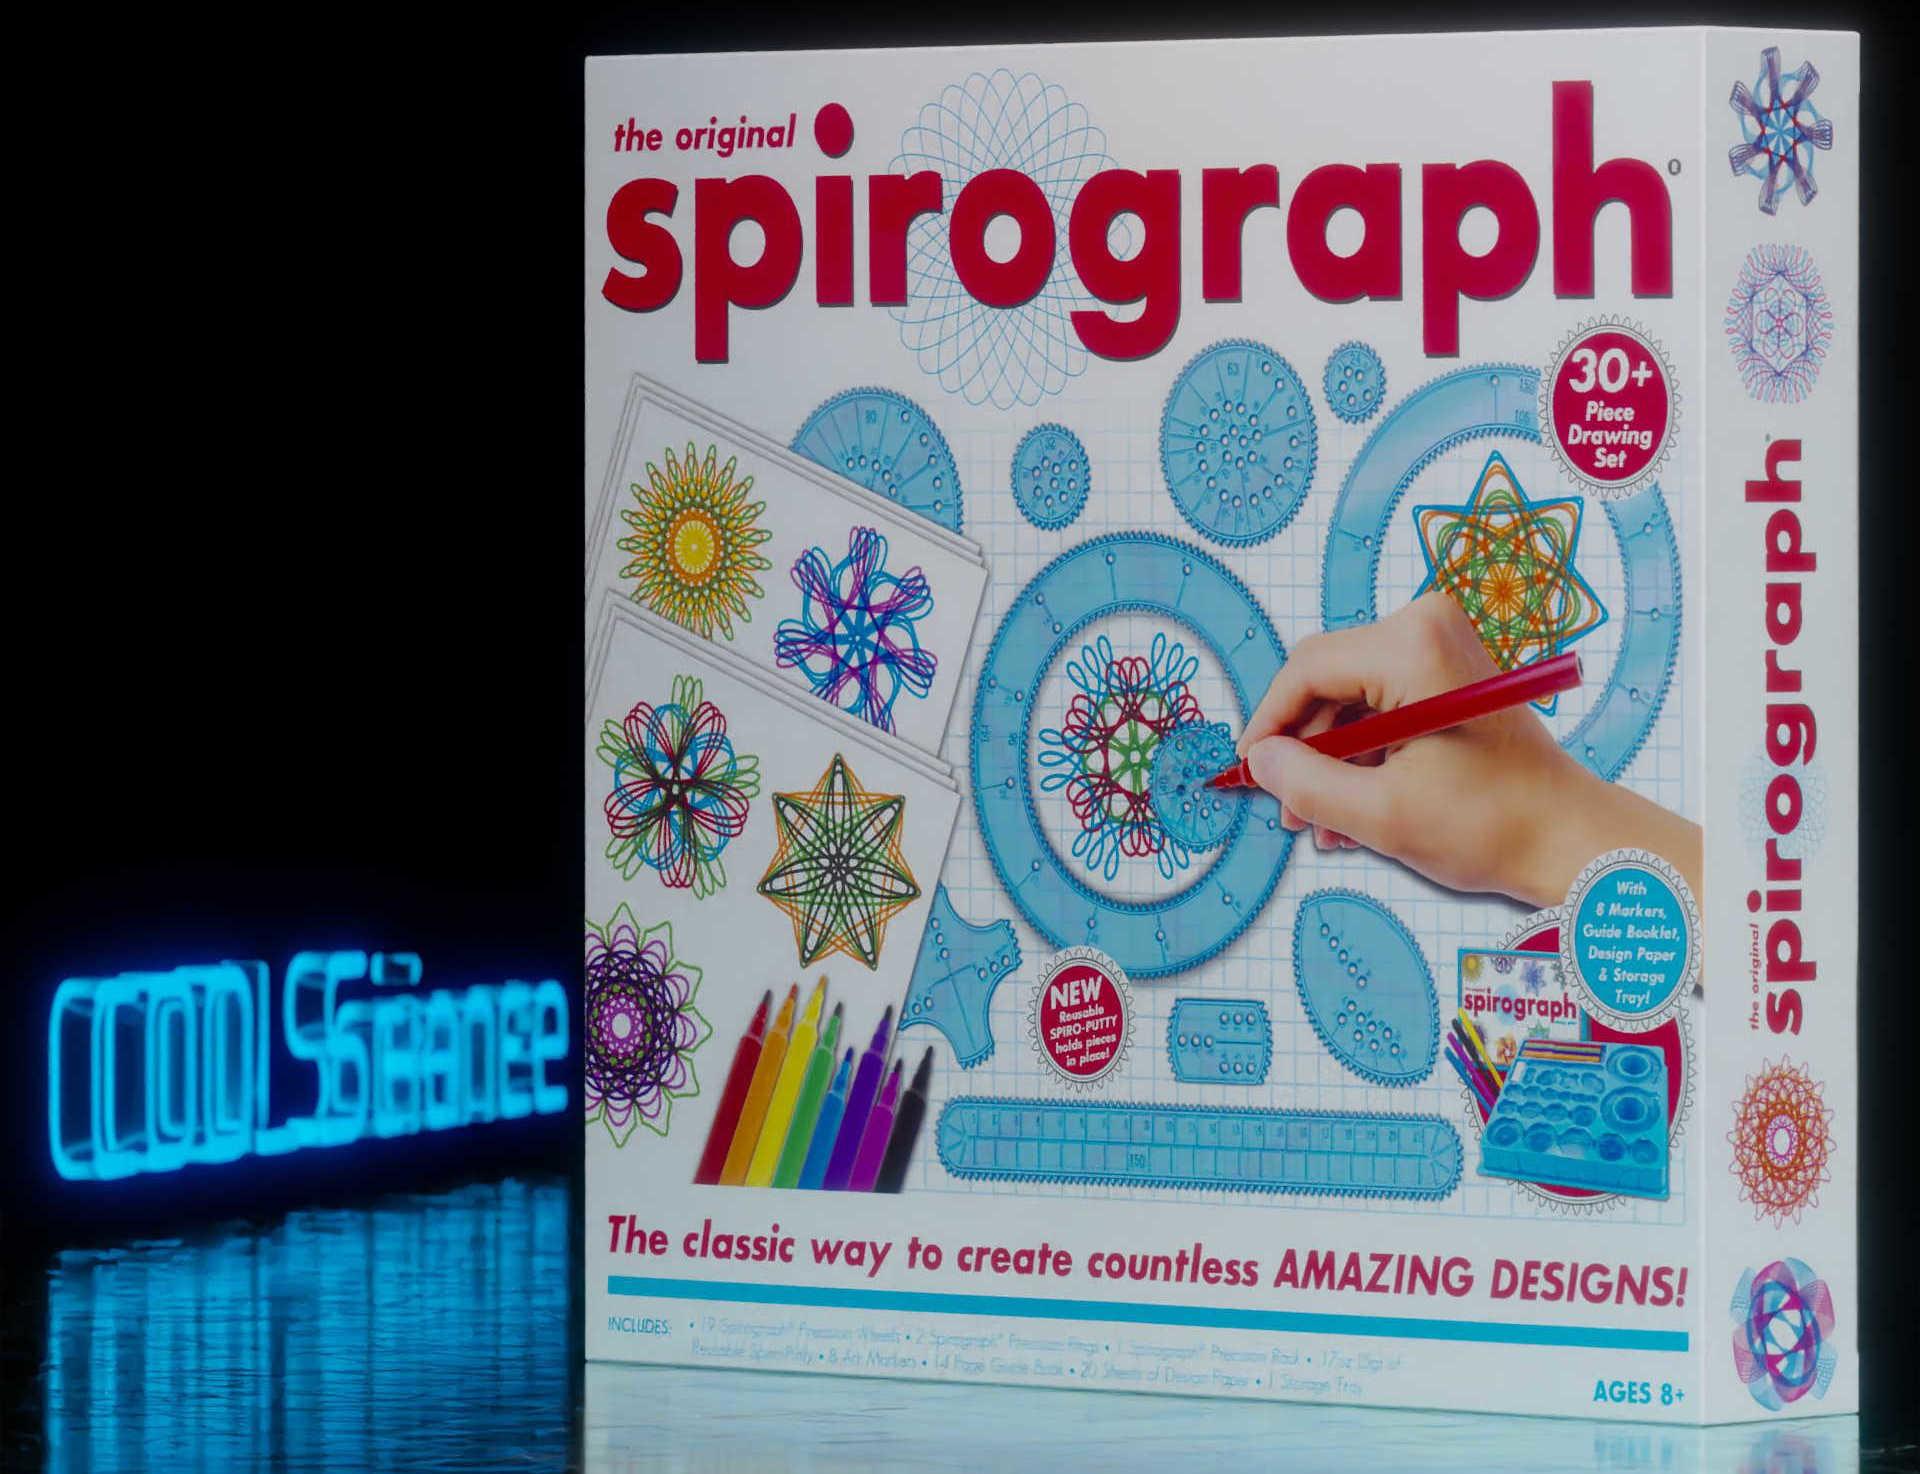 A selection of Spirograph drawing and design kits available from COOL Science